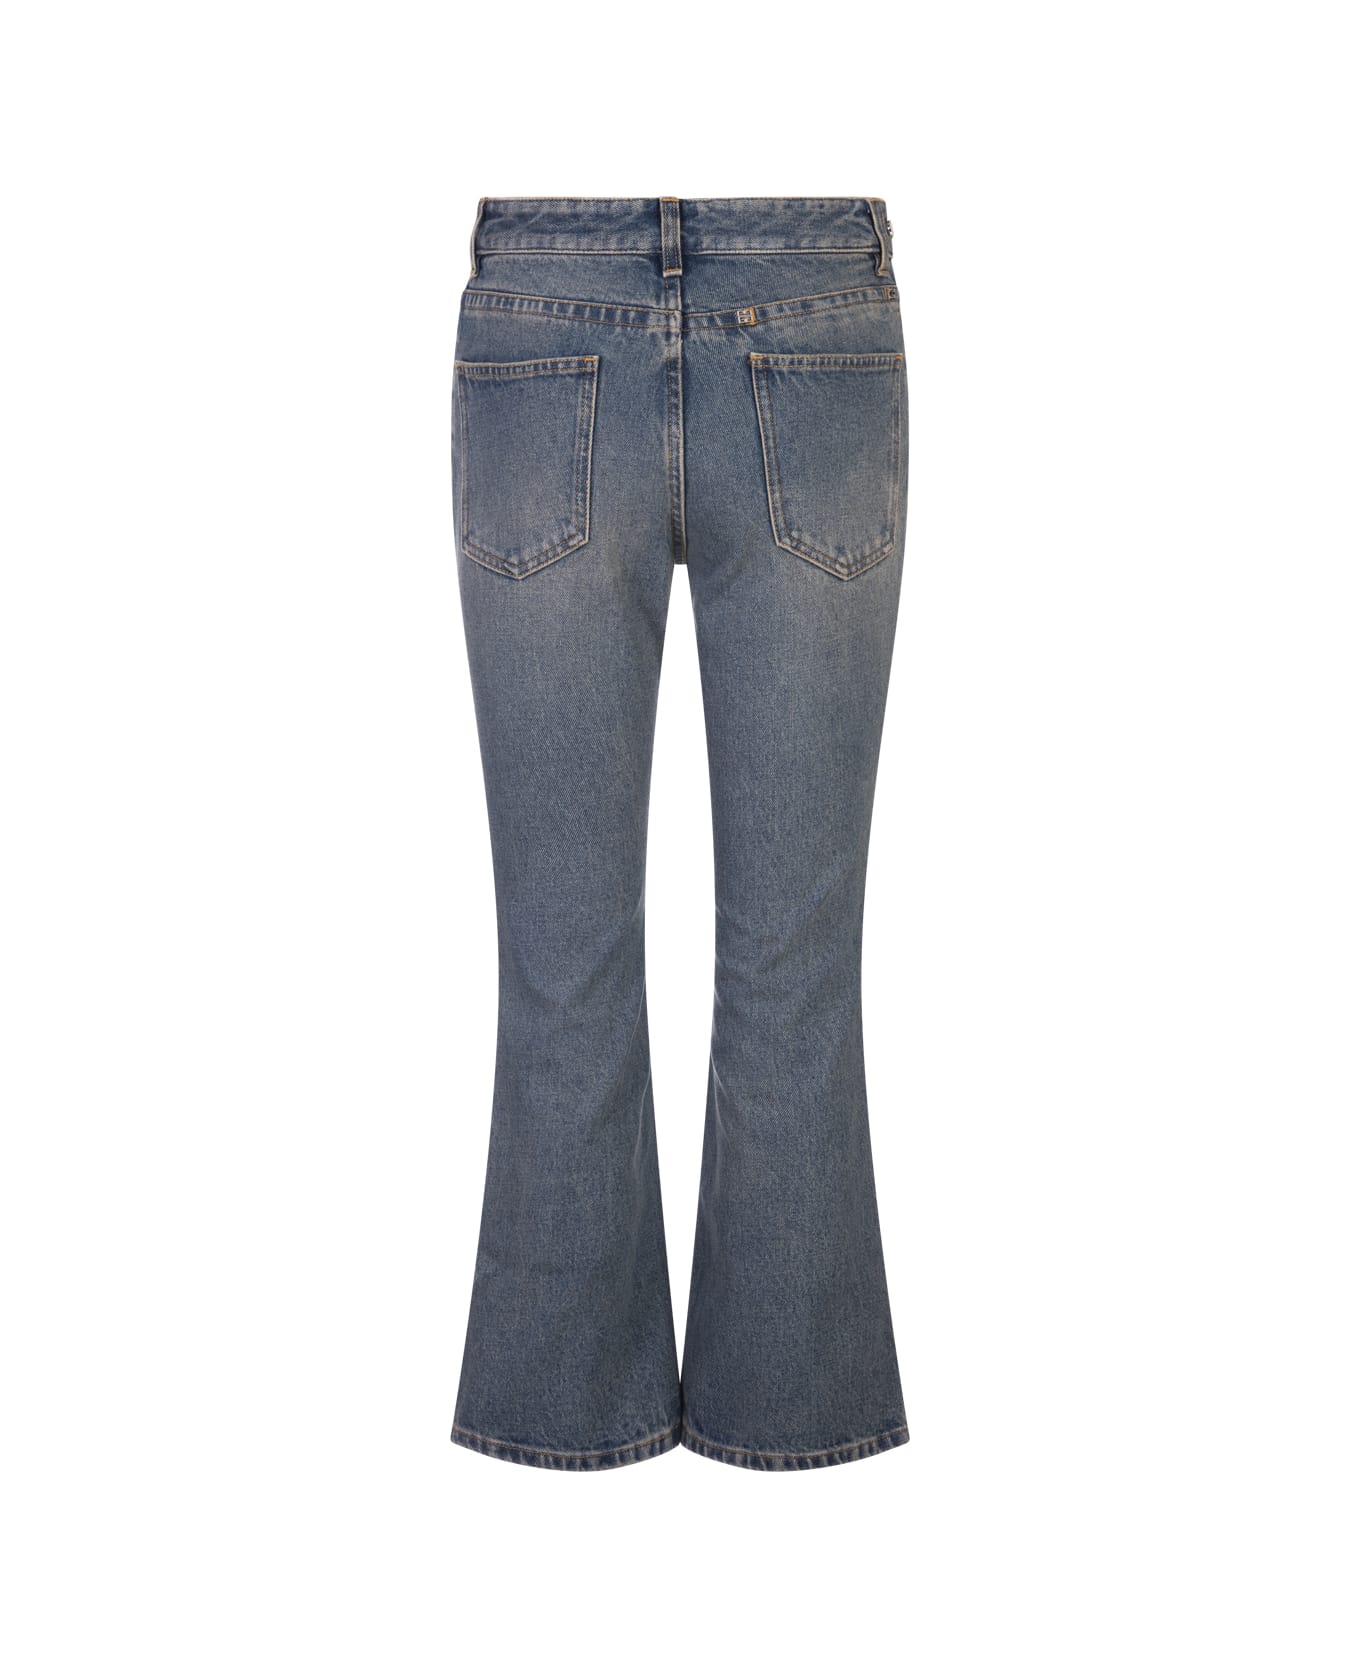 Givenchy Medium Blue Denim Jeans With Boot Cut - Blue